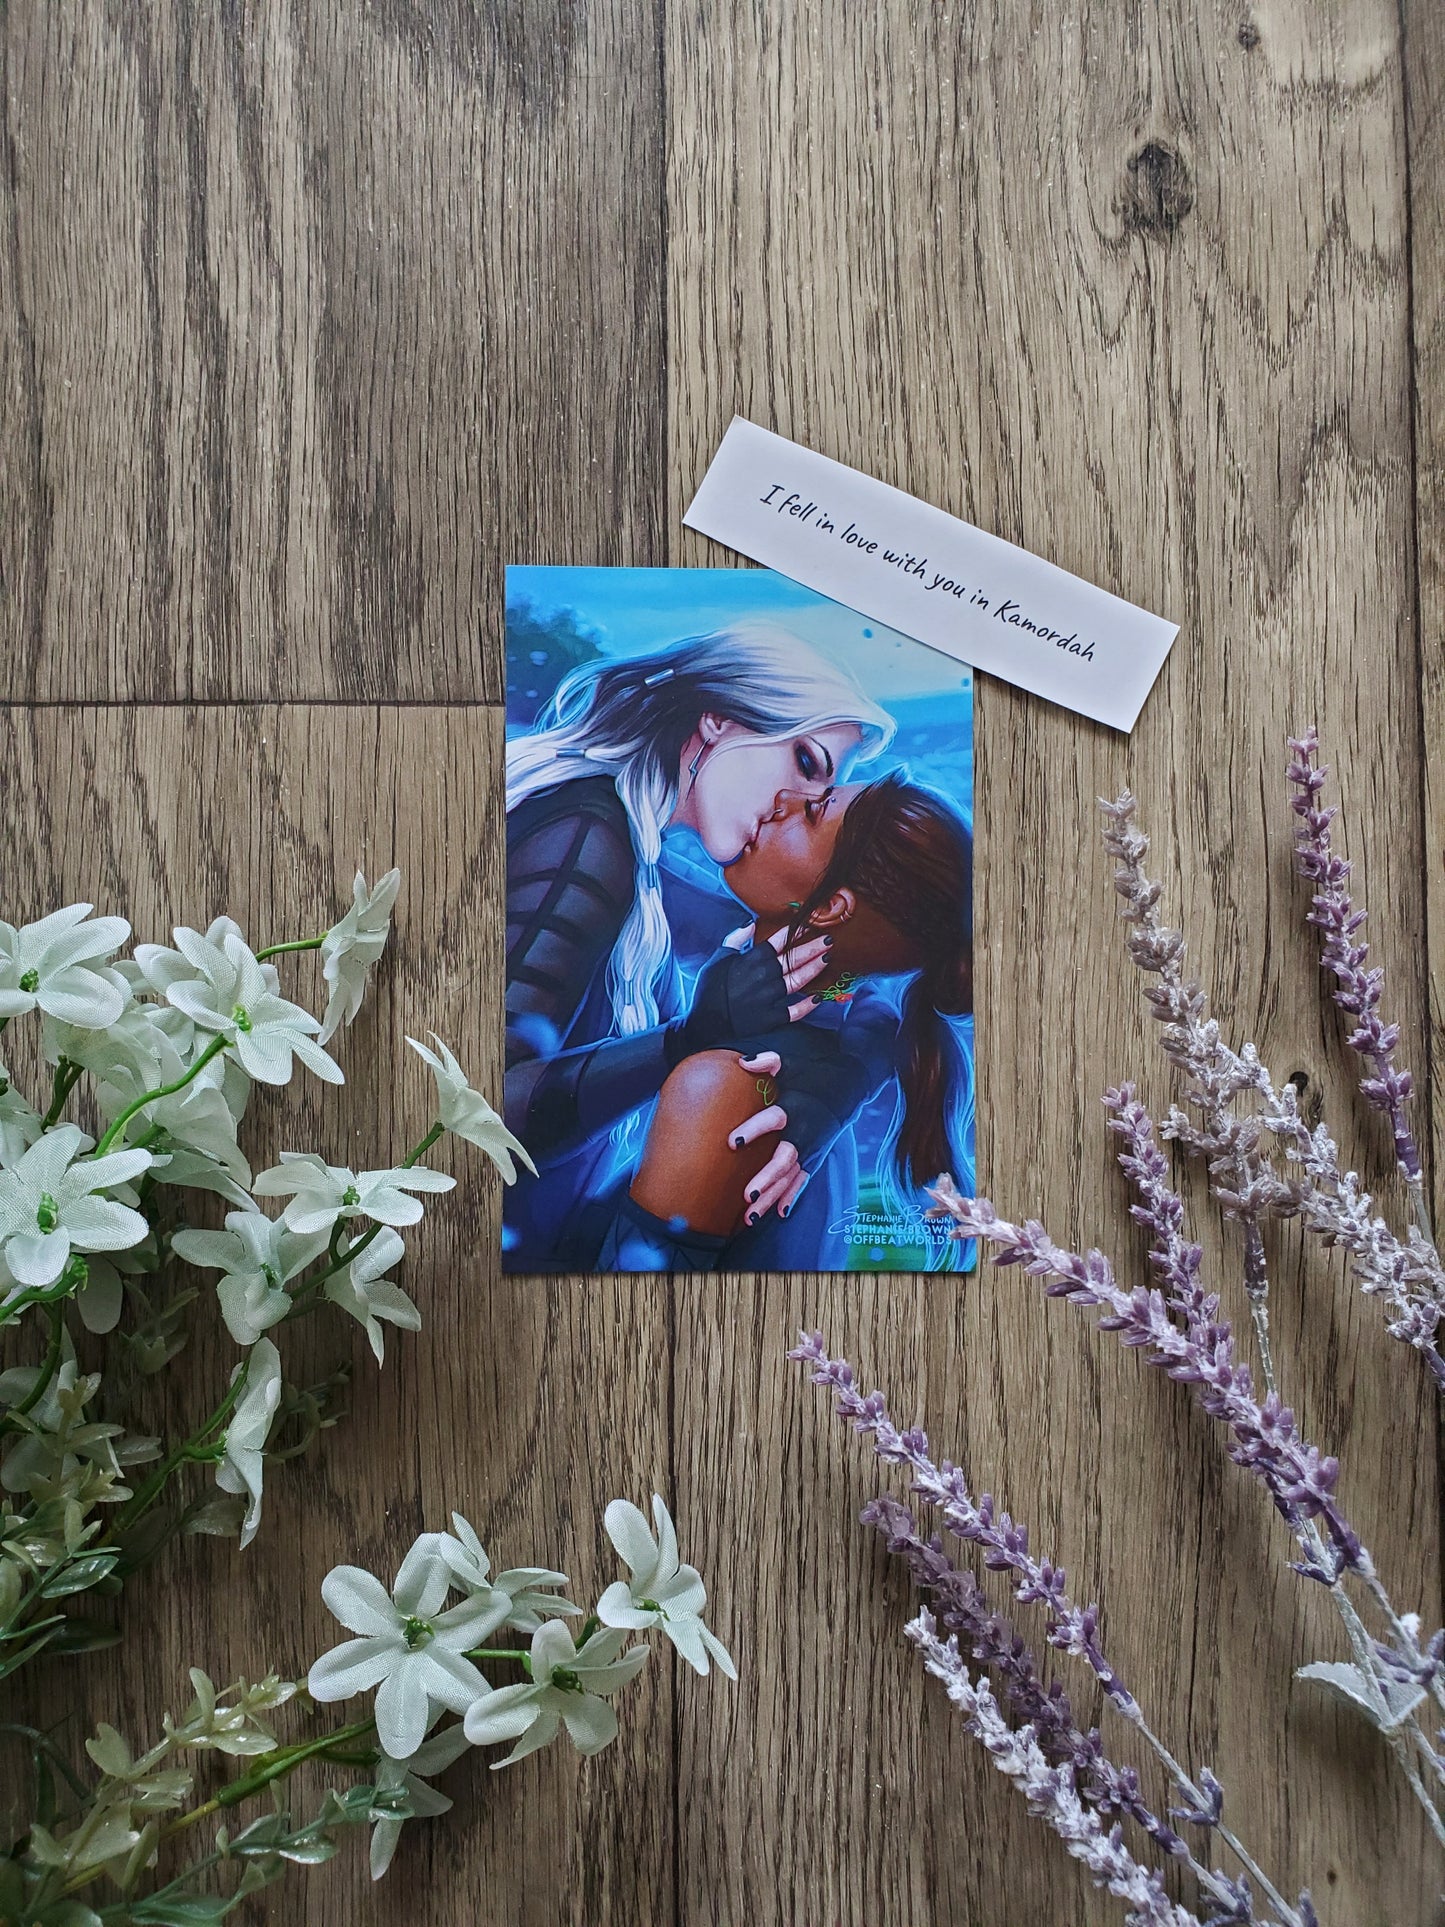 "I fell in love with you in Kamordah" - Postcard